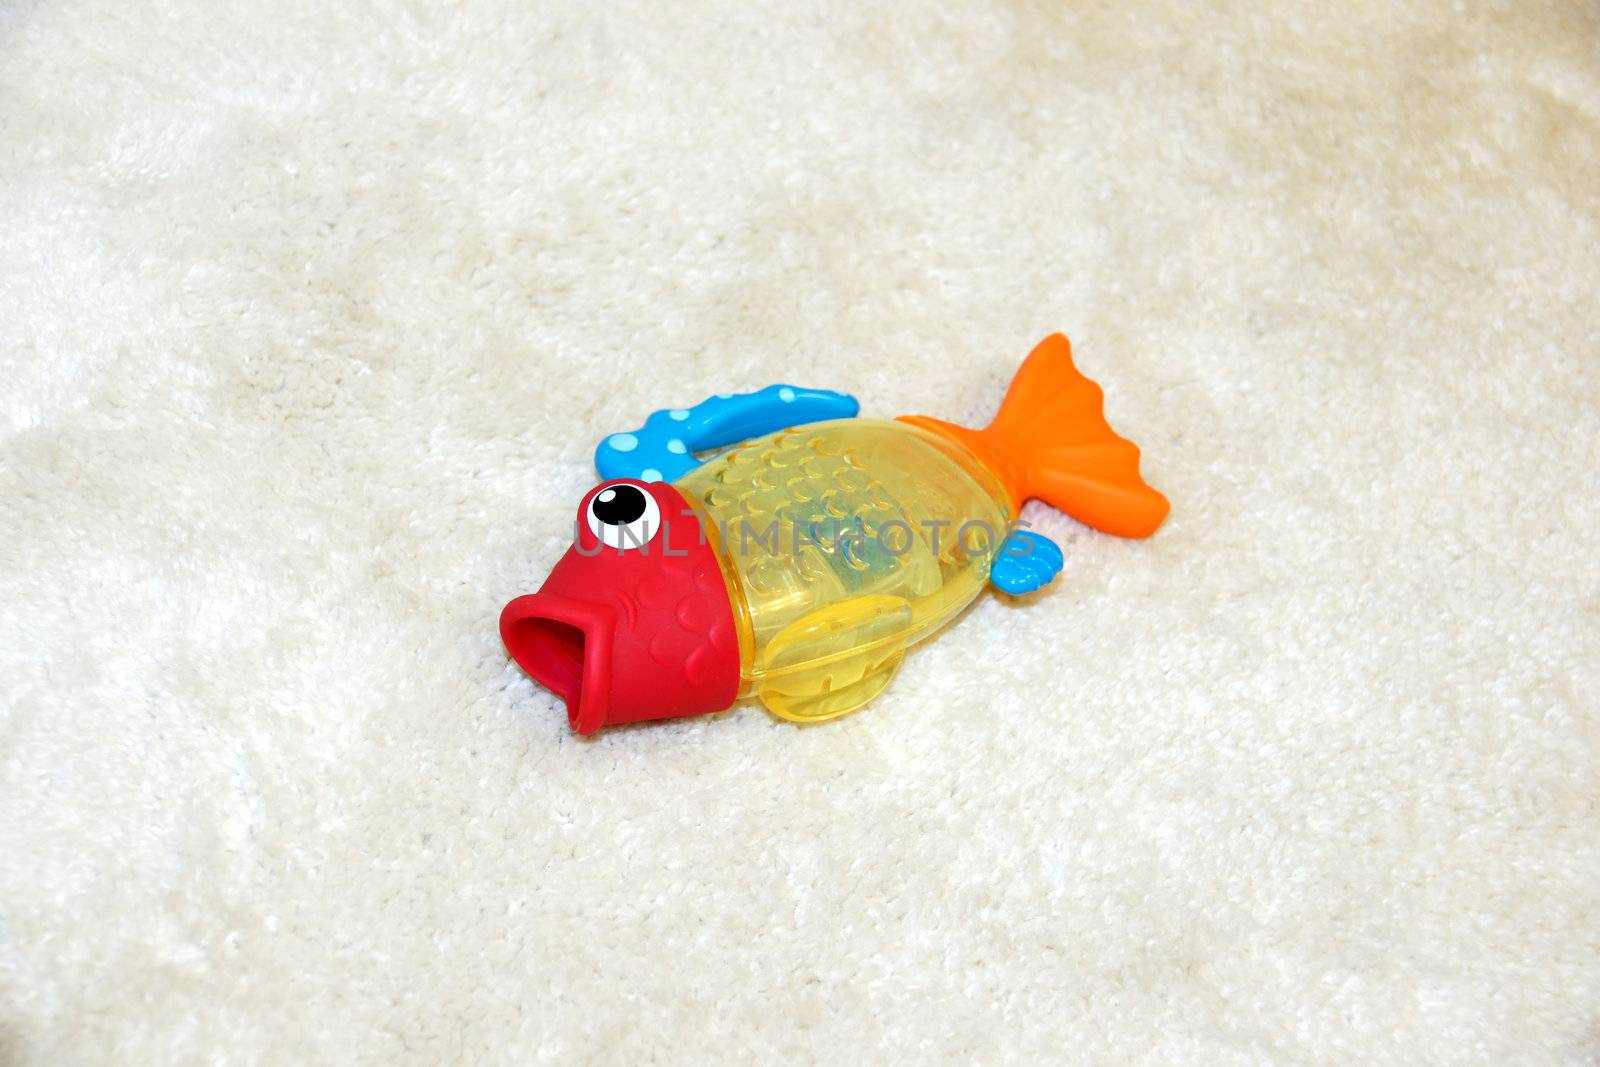 Concept of fish out of water with colorful plastic toy gasping, trying to breath as it has been thrown out of the tub on the rug by a kid.